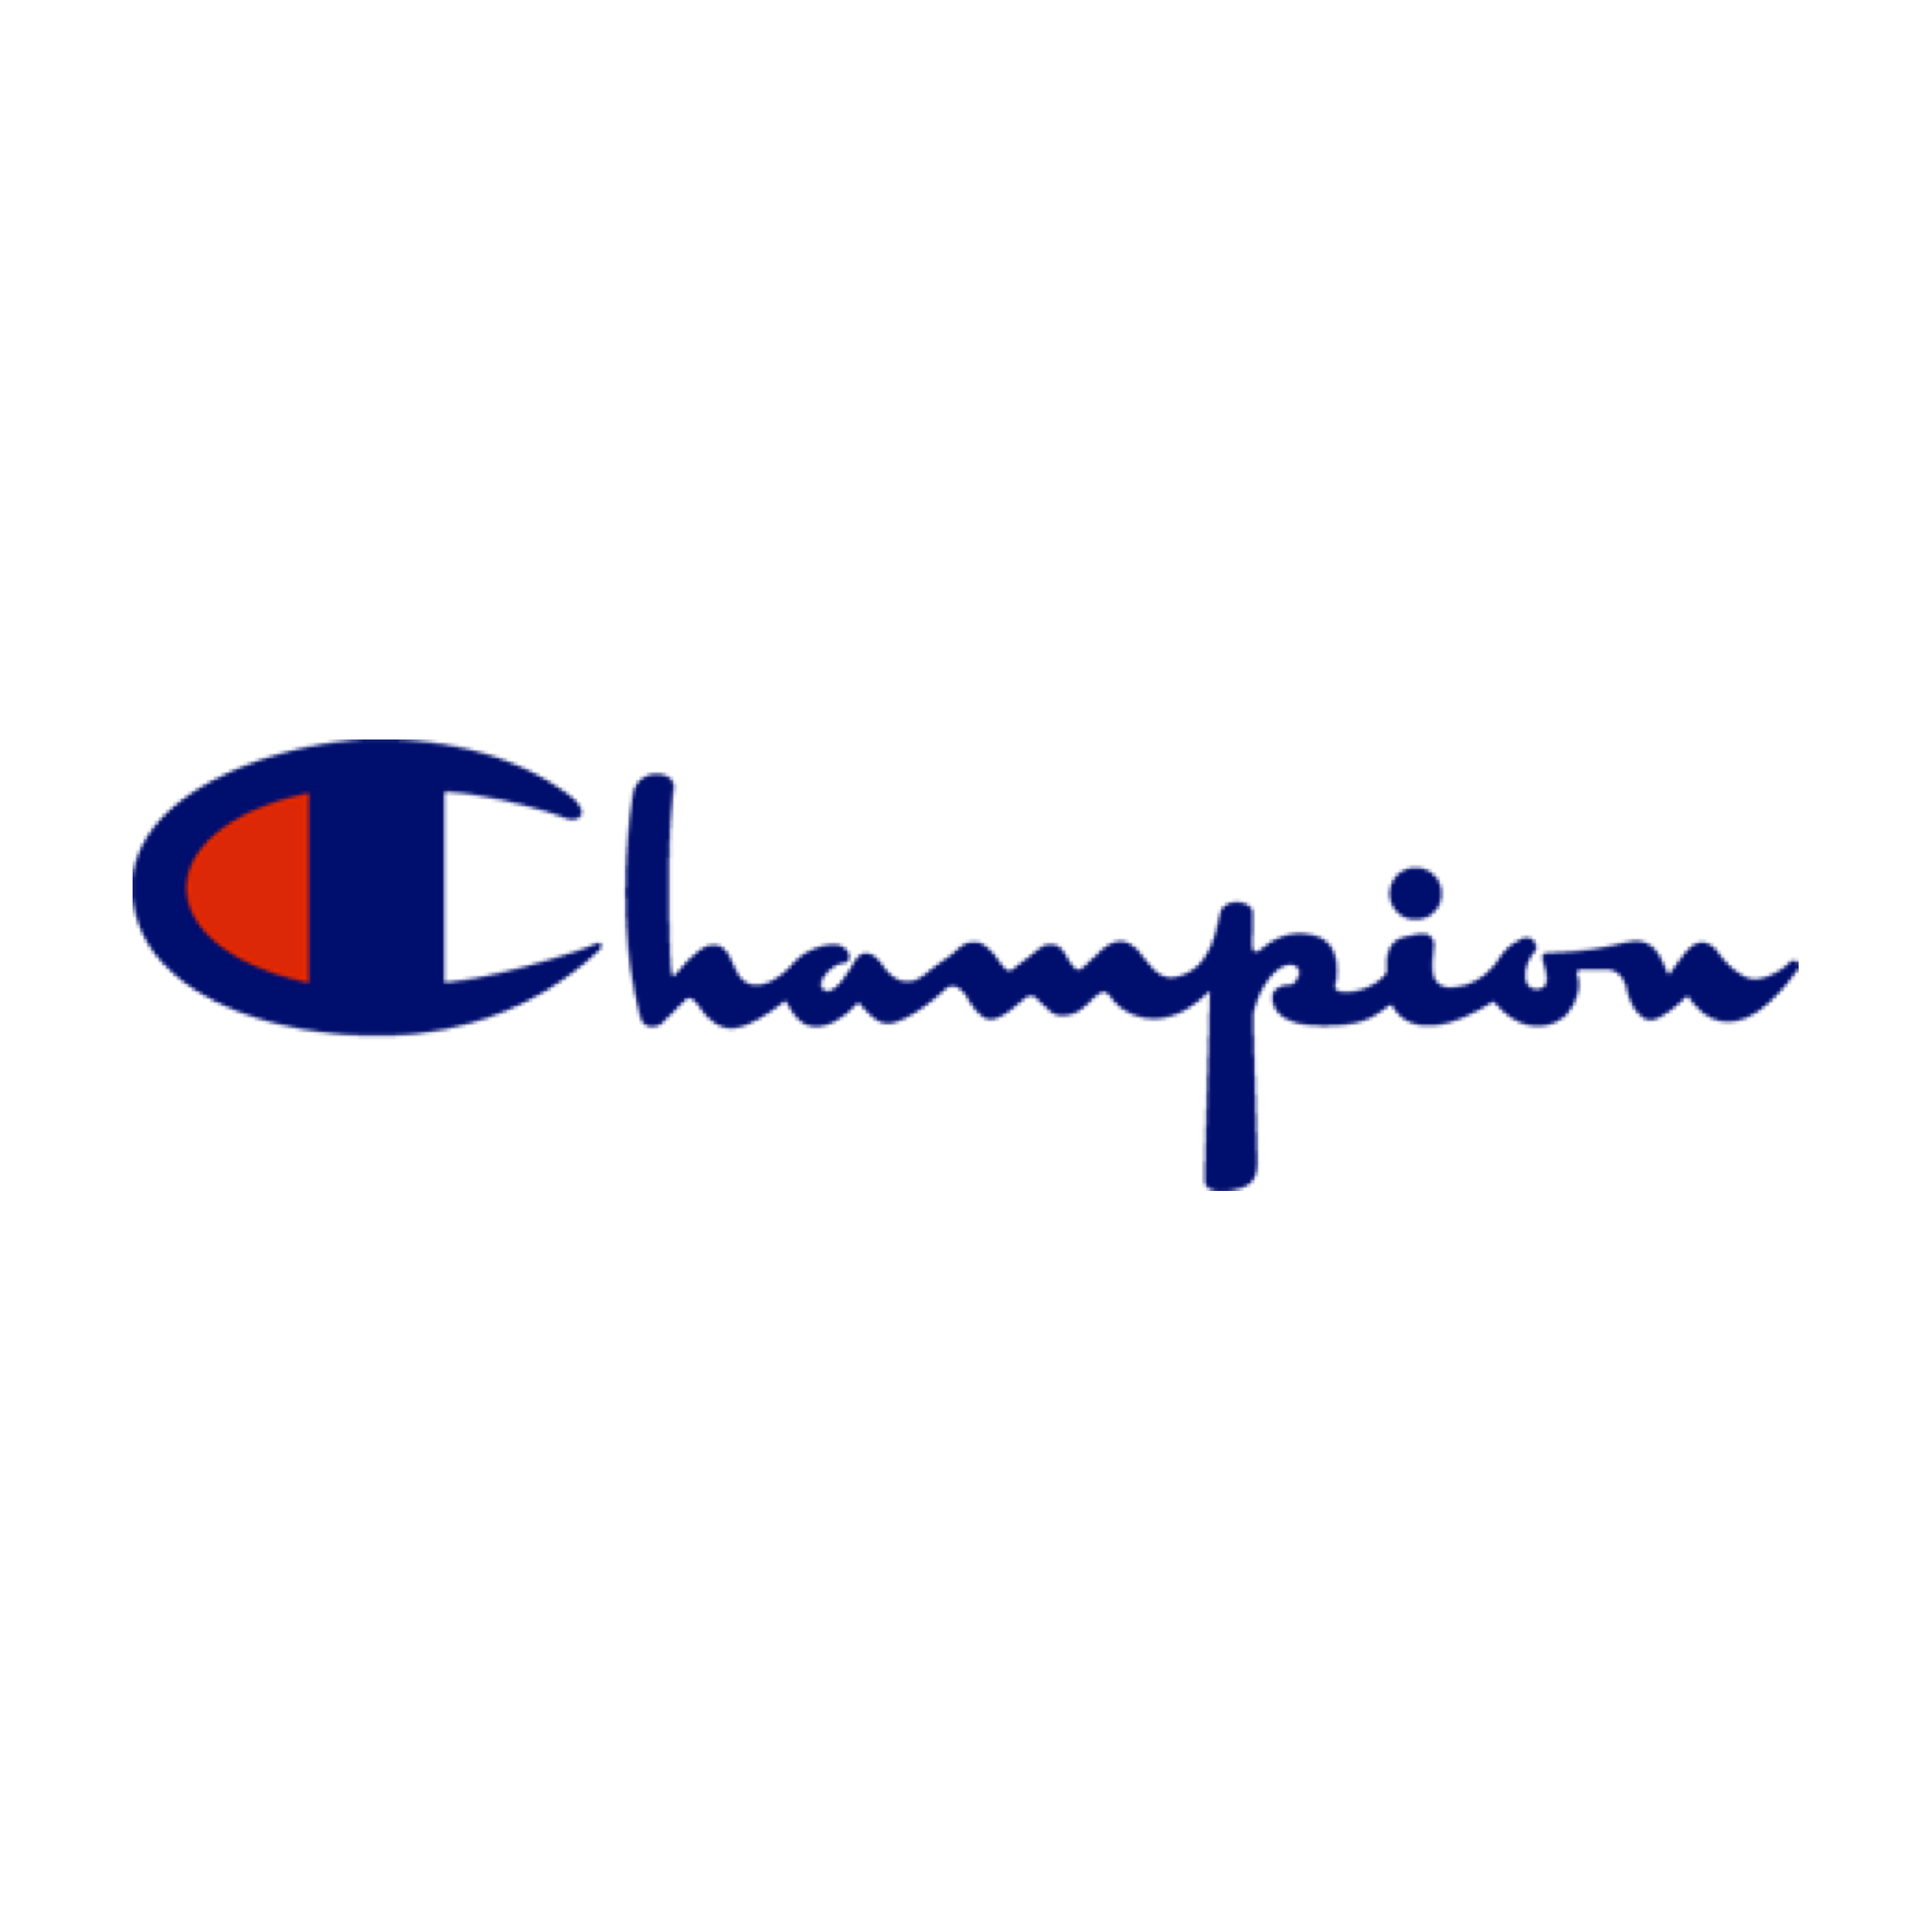 Champion Logo Wallpapers Top Free Champion Logo Backgrounds Wallpaperaccess